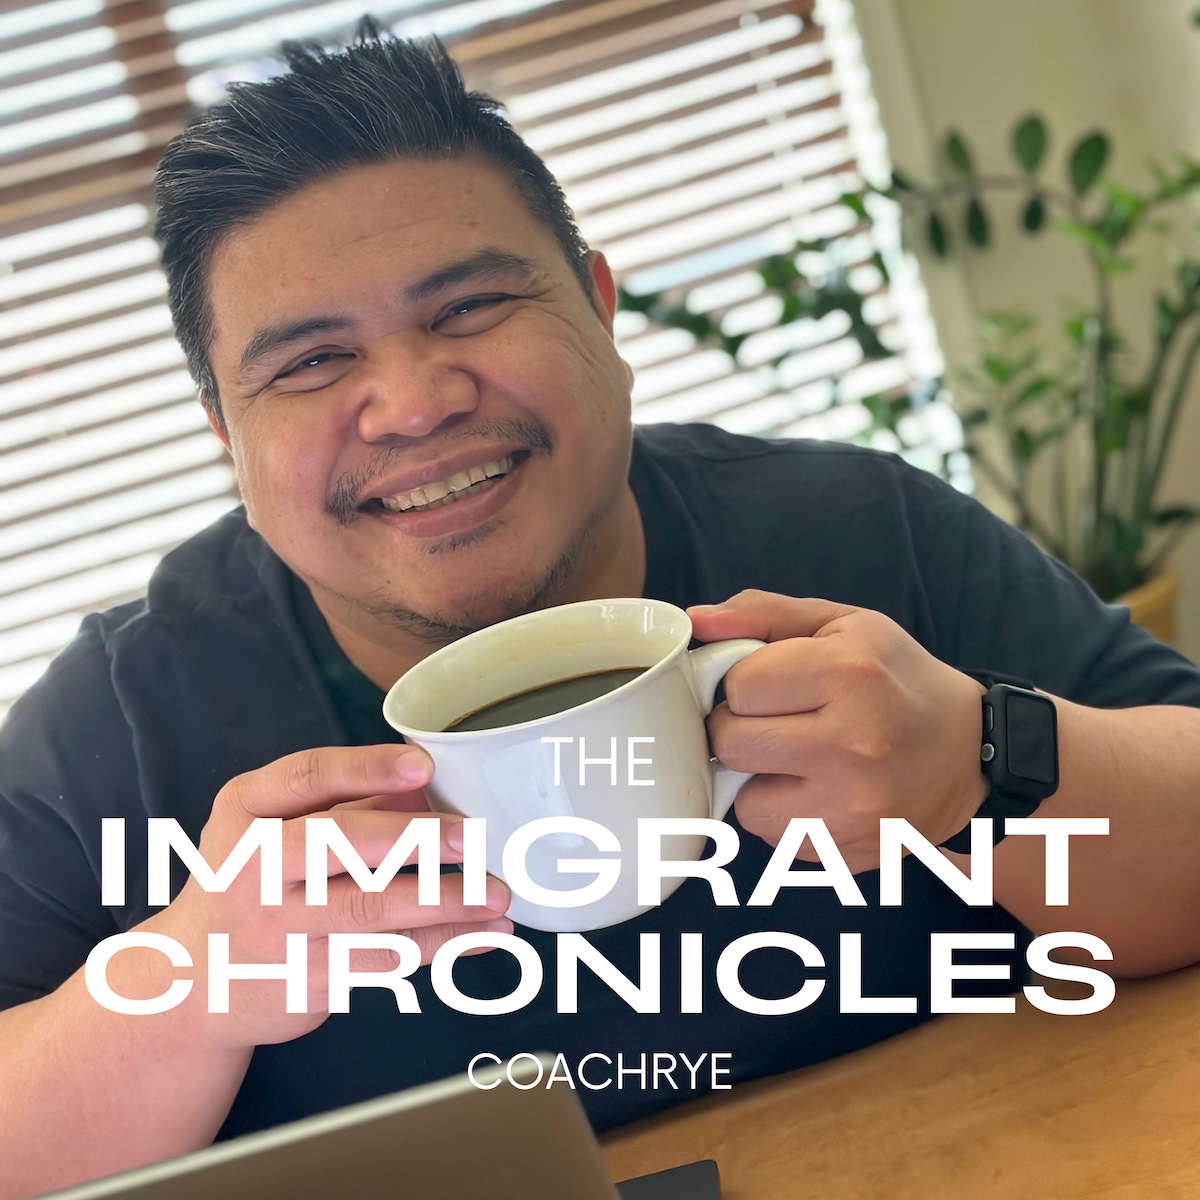 The Immigrant Chronicles on Google Podcasts